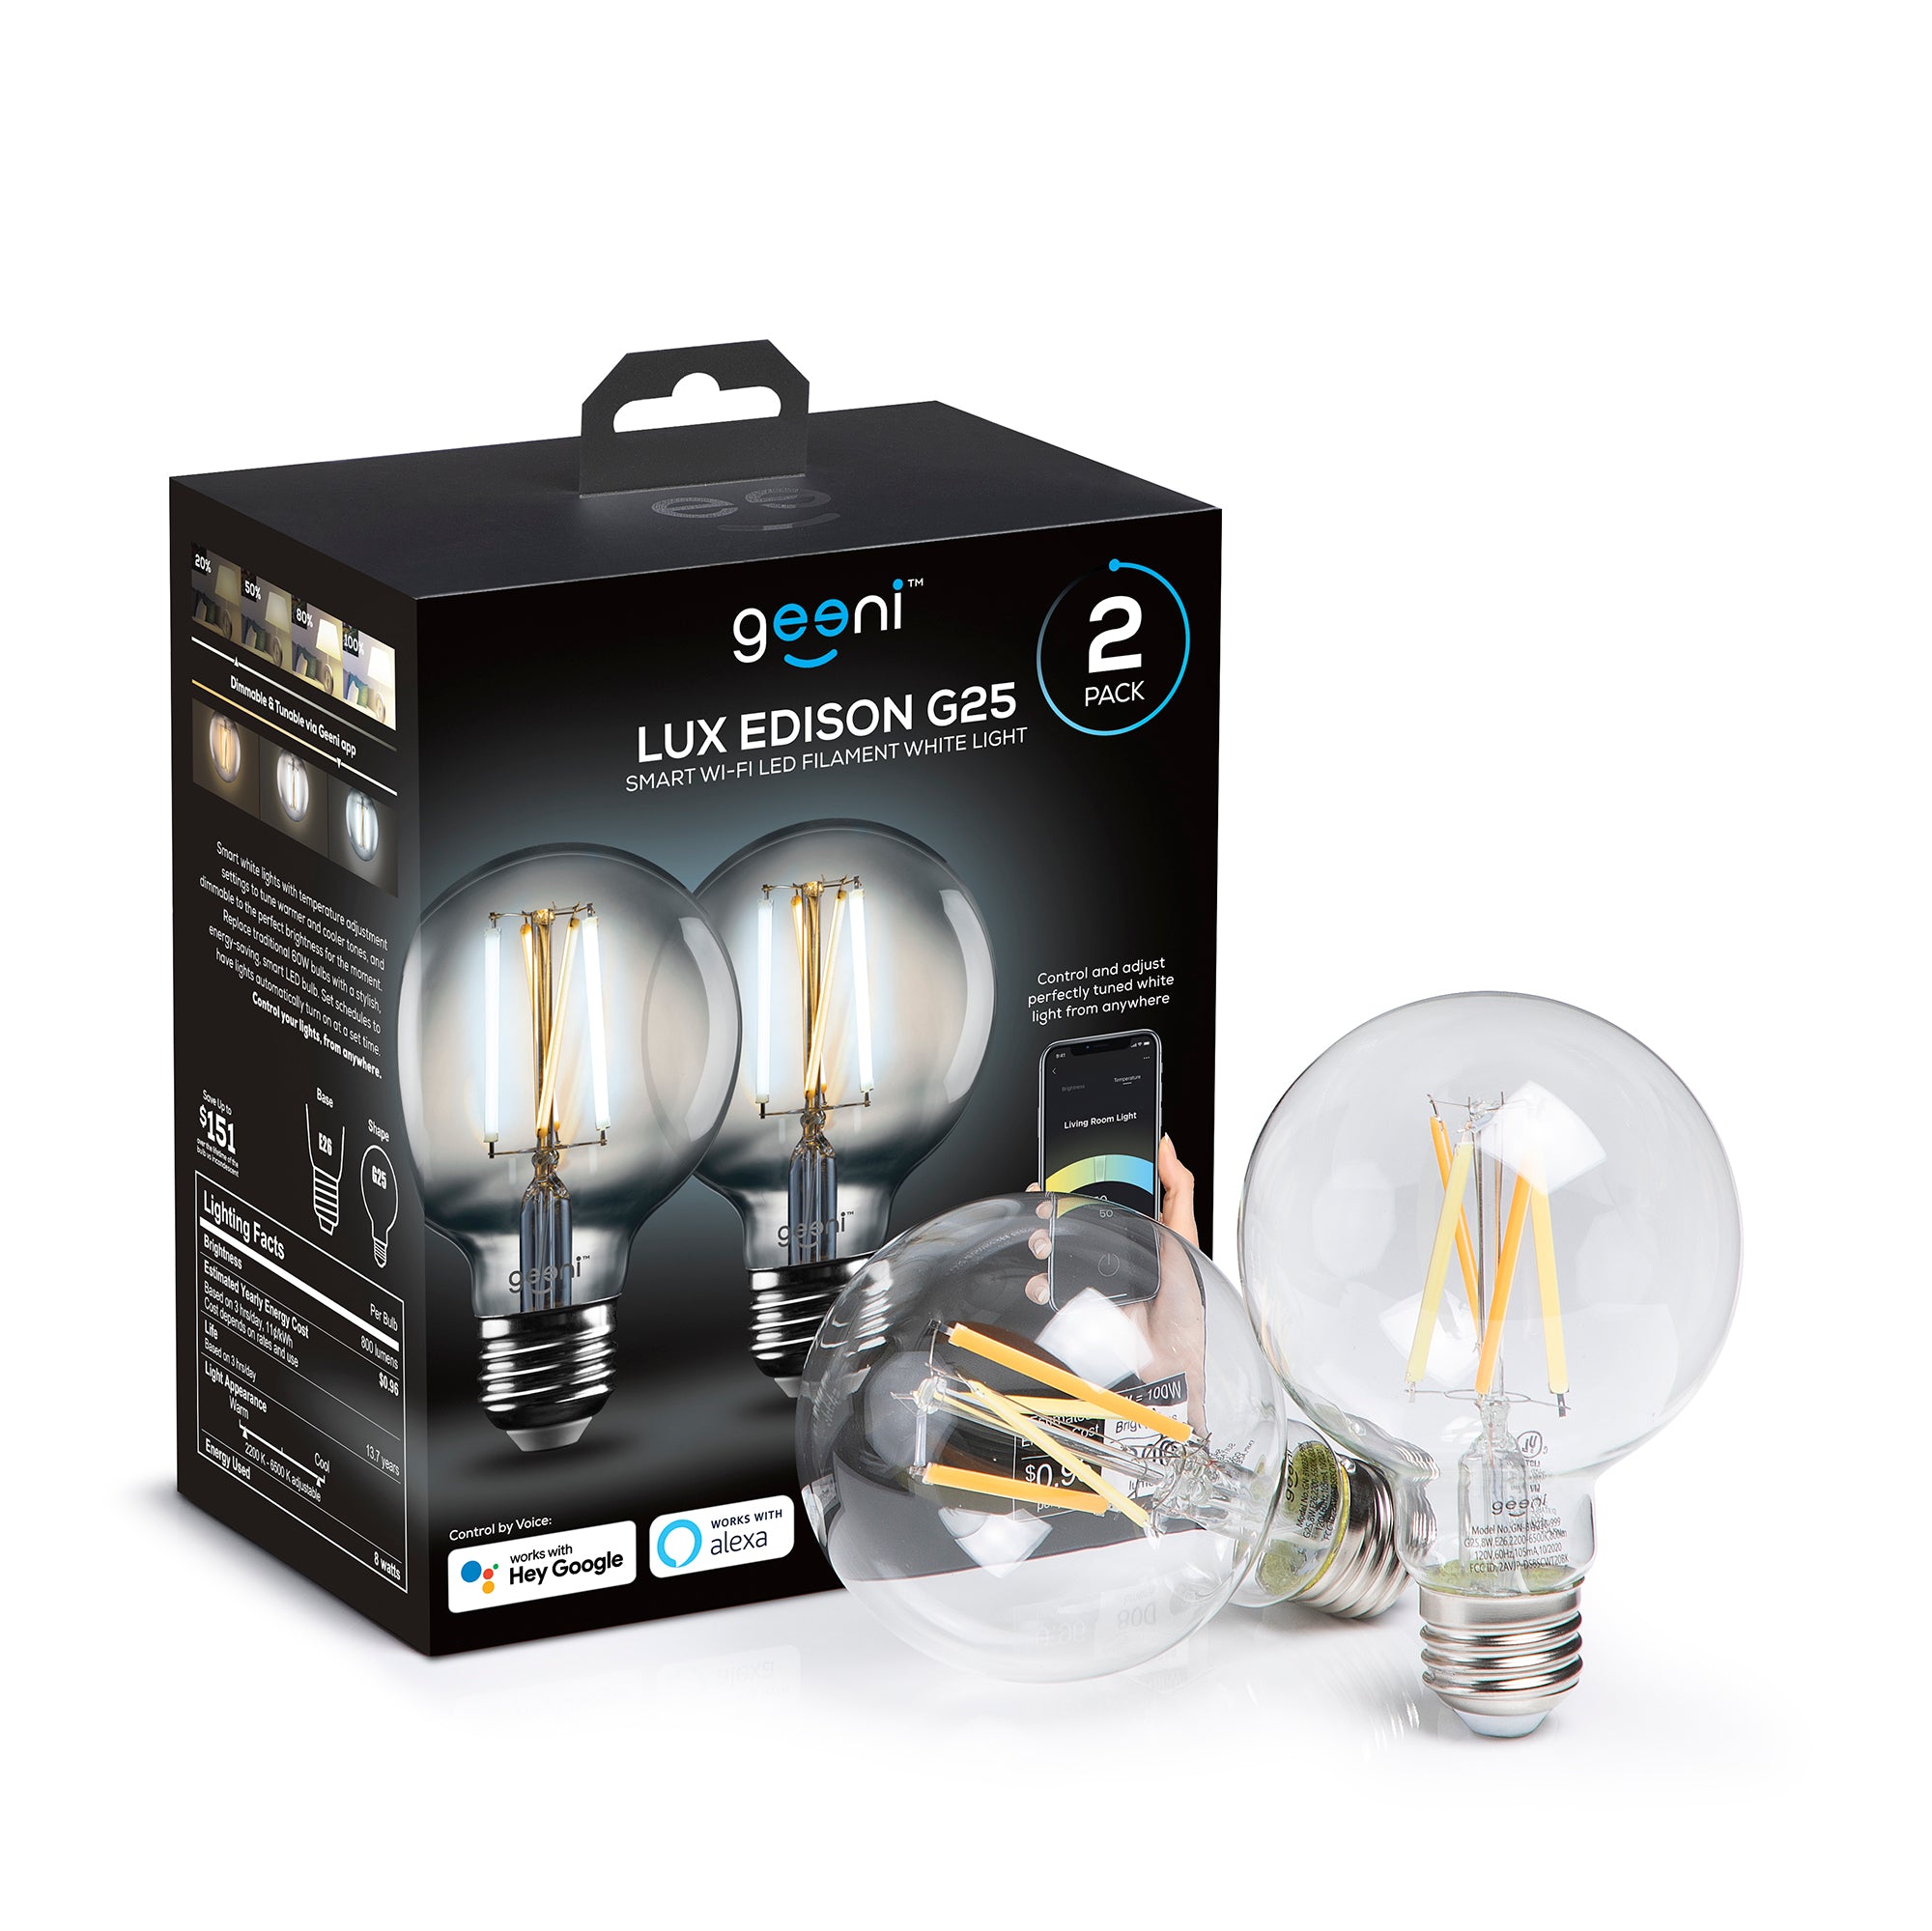 Geeni Lux Edison G25 Smart Bulb - 100W Equivalent, Tunable White (2-Pack)